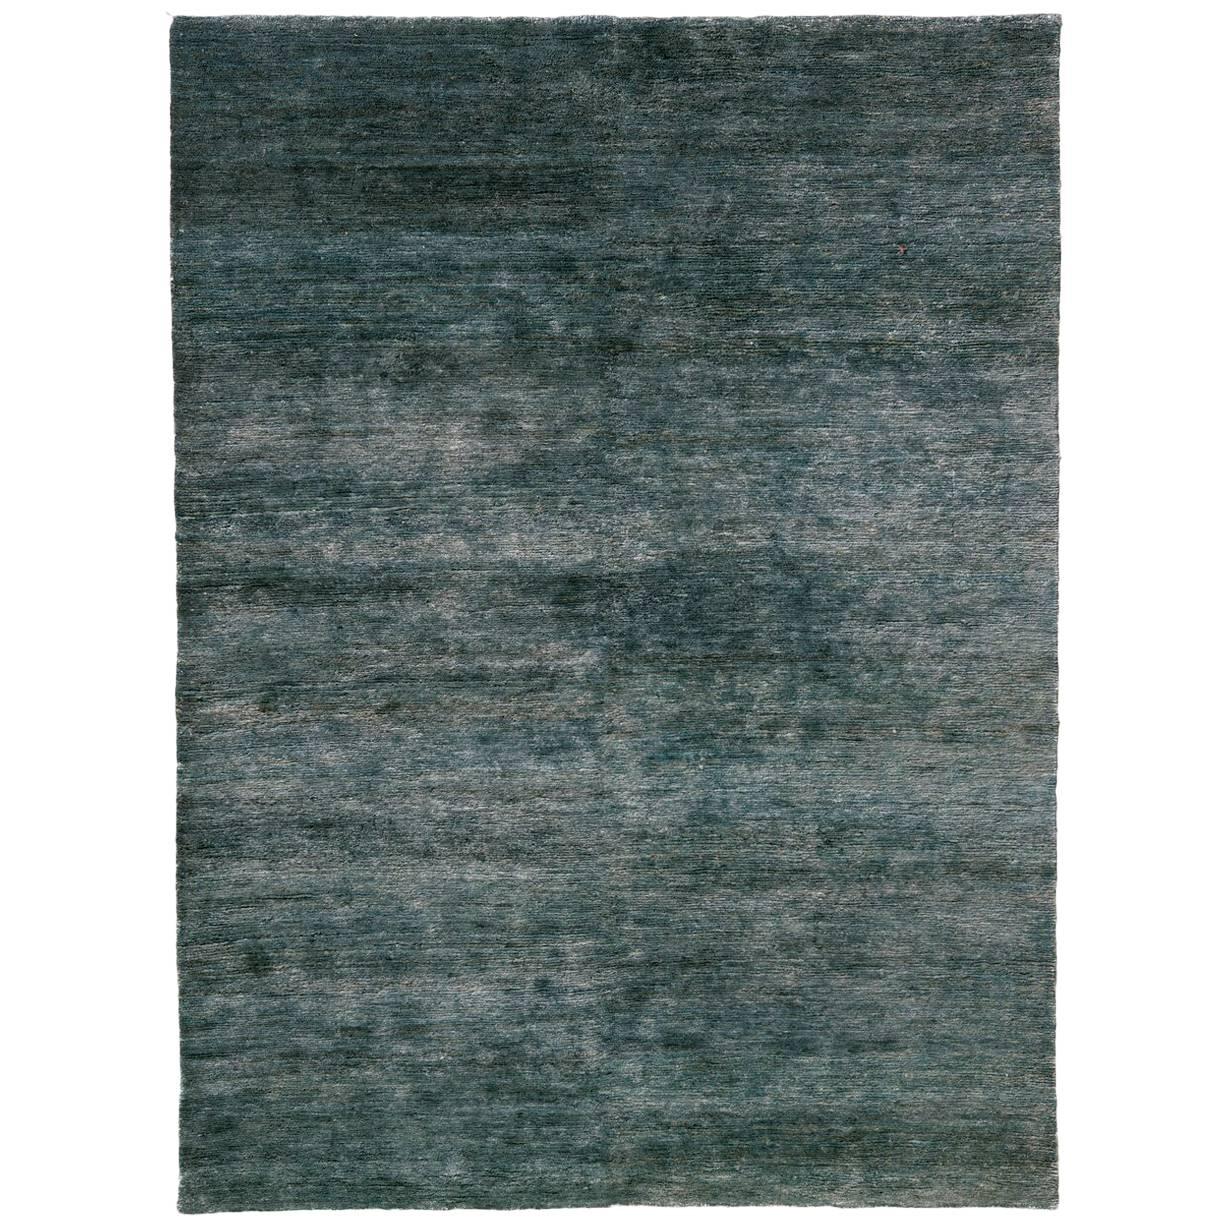 Noche Blue Green Hand-Knotted Jute Rug by Nani Marquina, Ariadna Miquel, Small